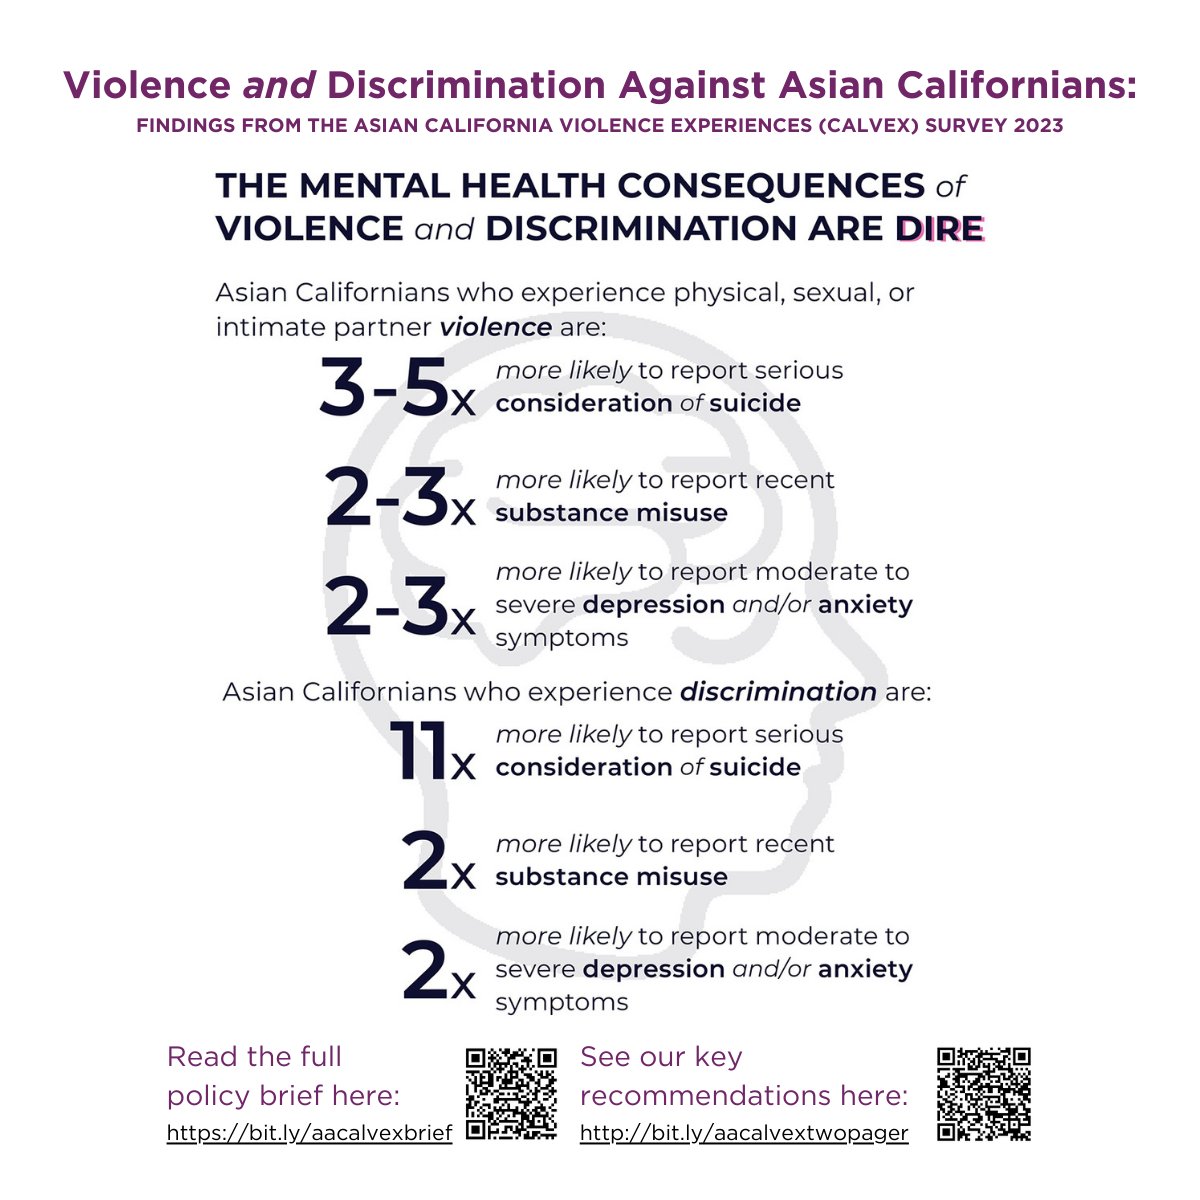 Violence and discrimination are key drivers of mental health concerns in Asian American communities. 

Mental health services tailored to meet the needs of Asian American communities need to be prioritized to help alleviate the US mental health crisis. #AsianAmericanMentalHealth